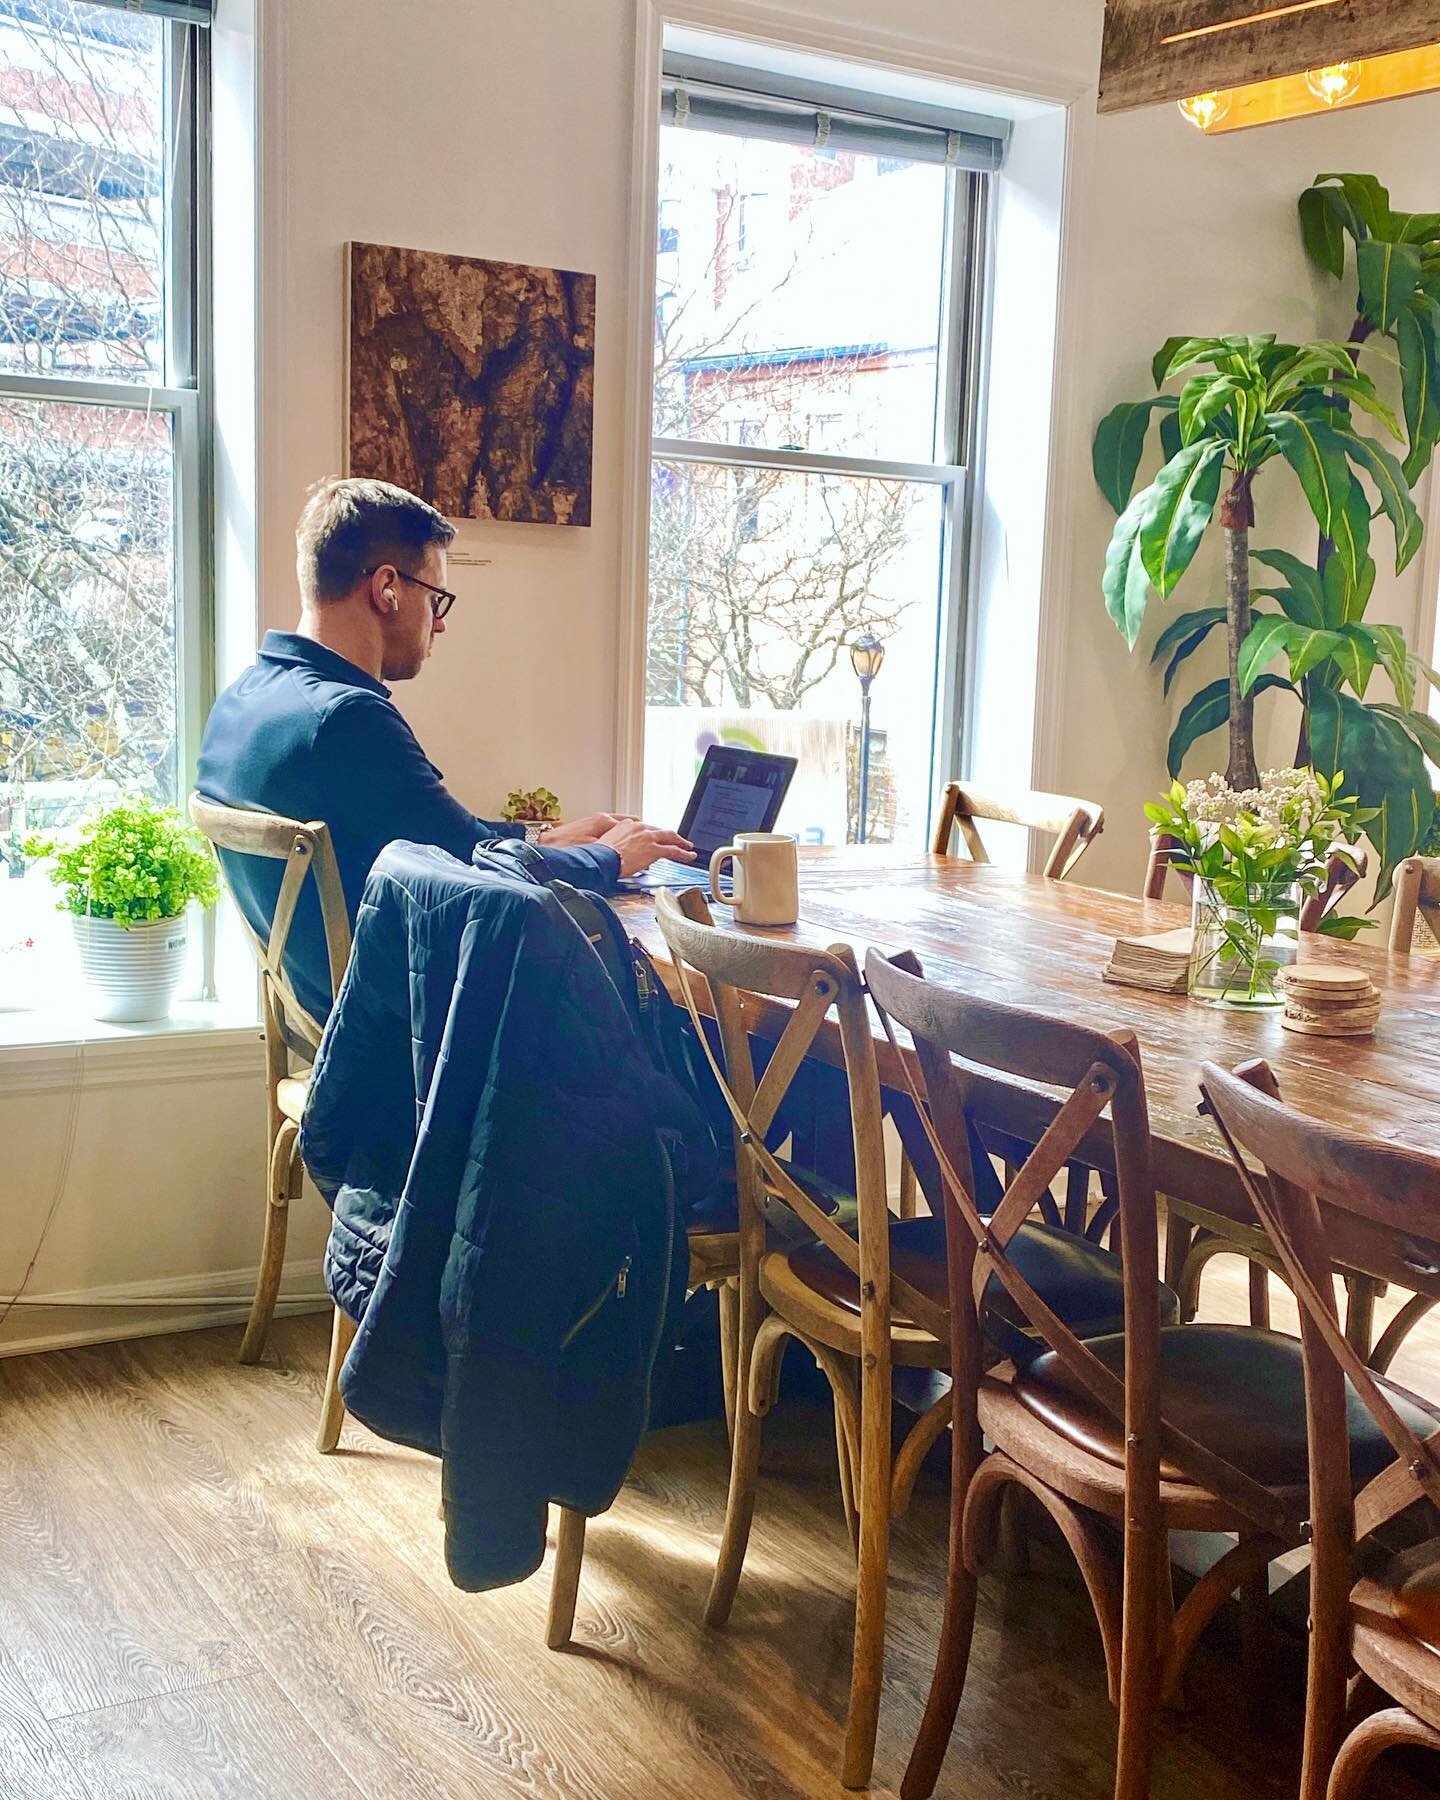 Spring is here! 🌸 Grab a window seat and soak up the sun in our cafe area ☀️ #Productivity #NaturalLight #Cozy #Coworking #MorristownNJ